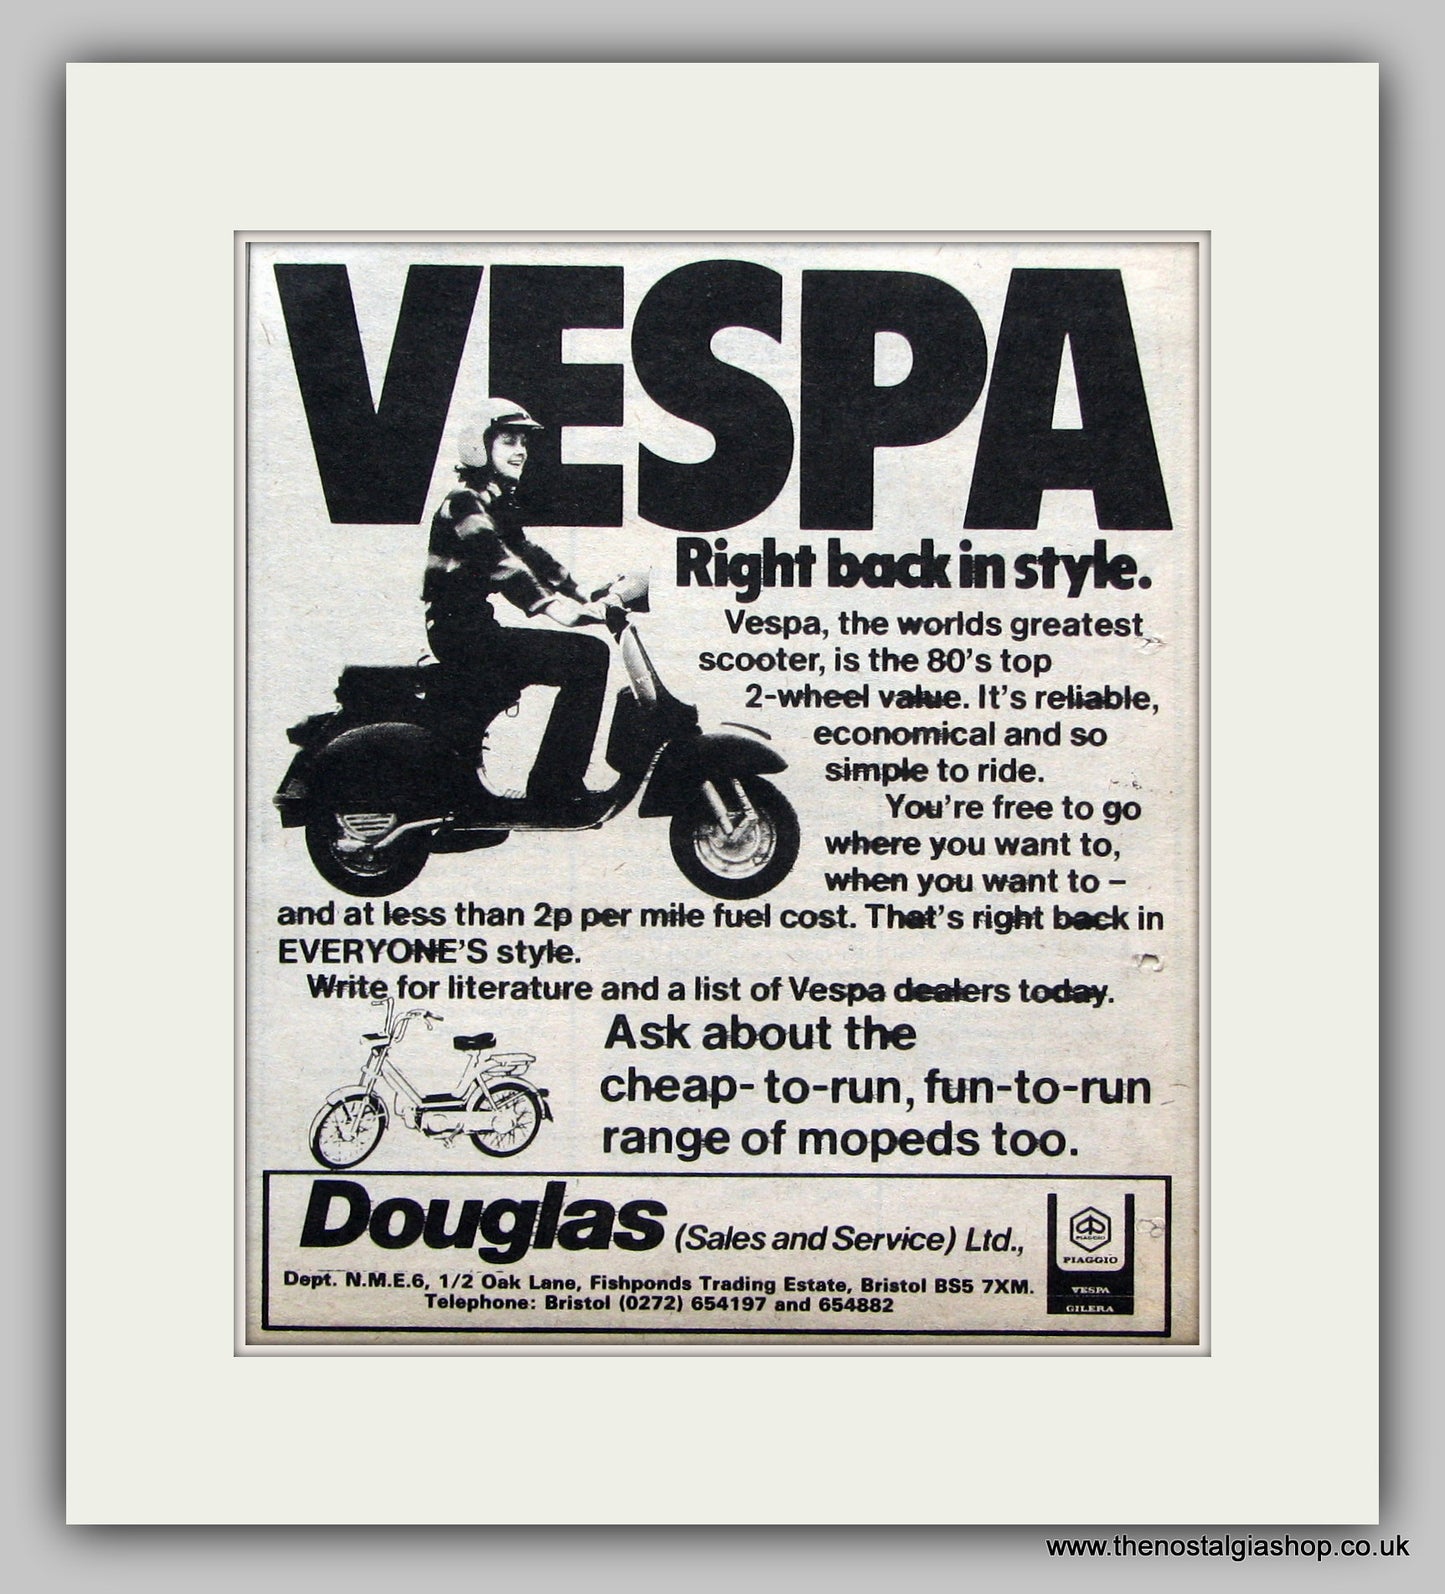 Vespa Scooters Back in Style. 1980 Vintage Advert (ref AD6845)